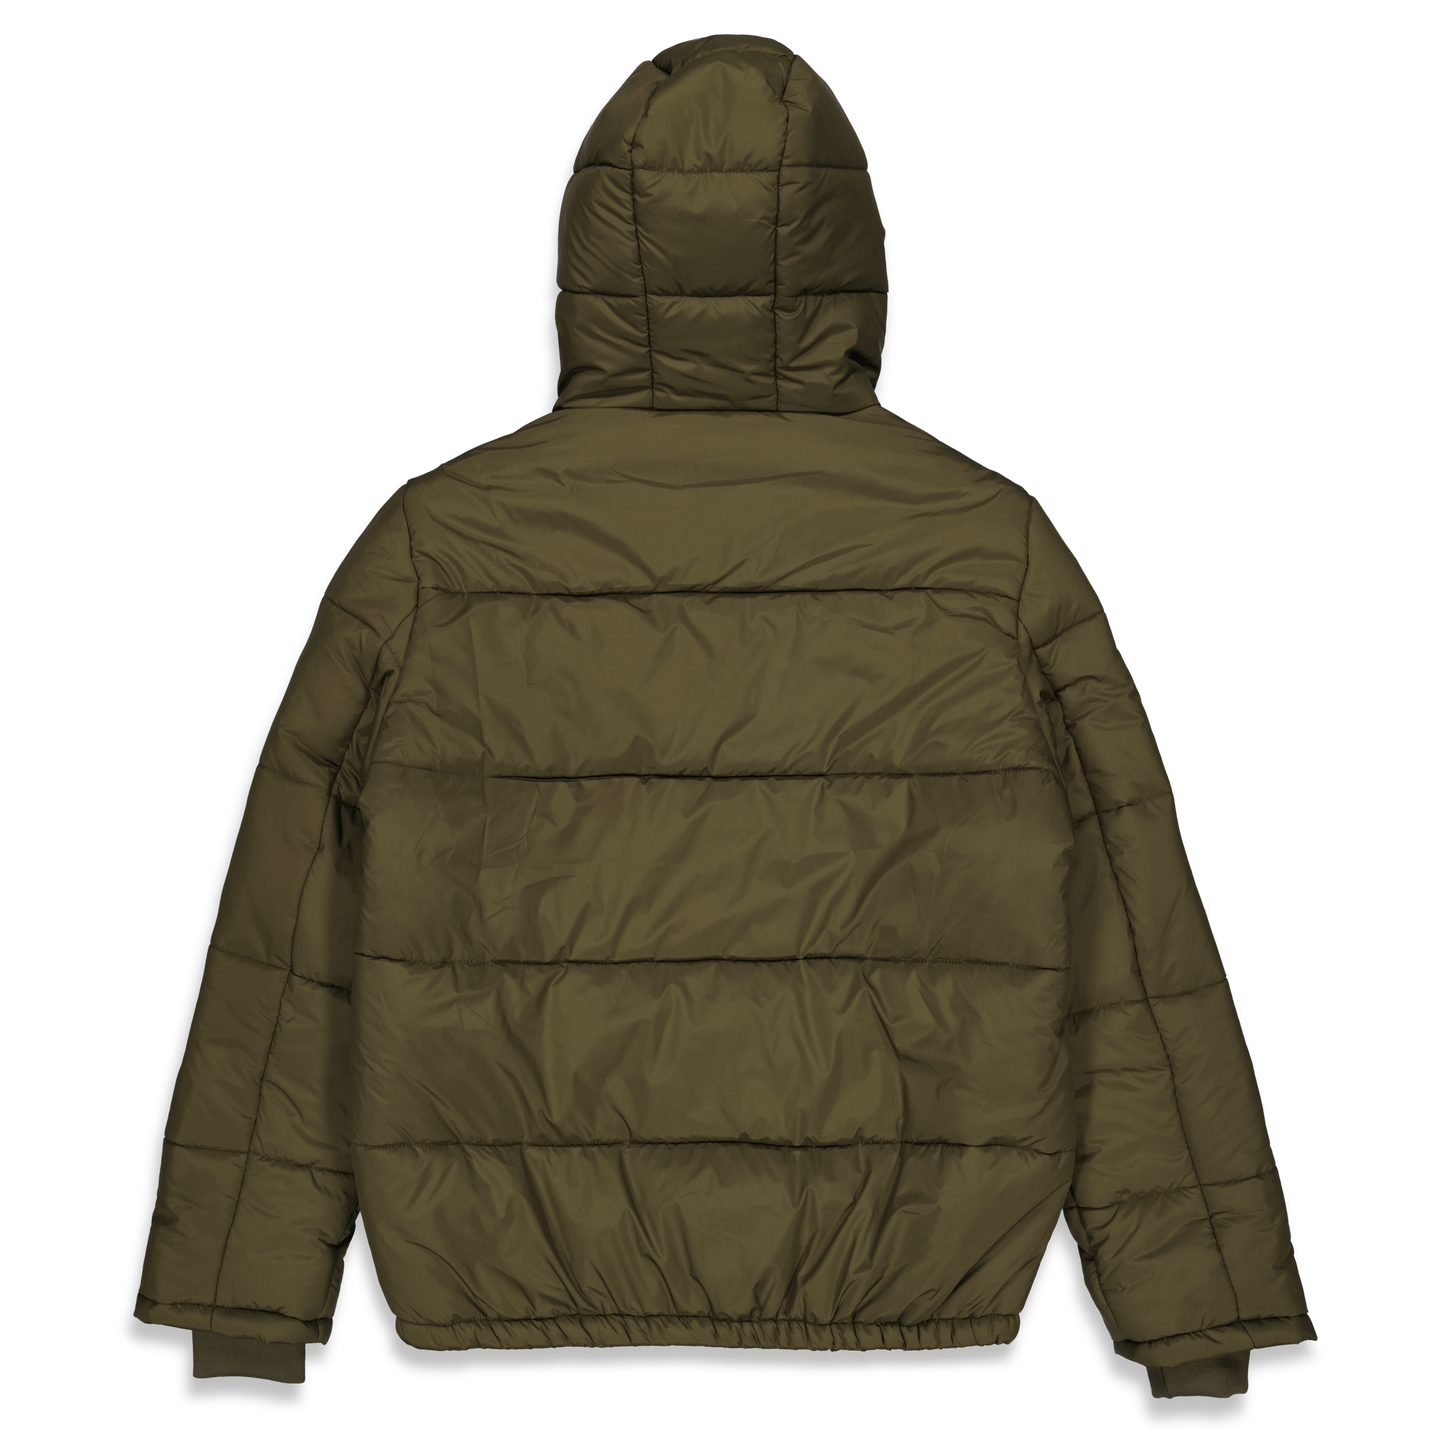 The Loose Company 8-Ball Puffer Jacket